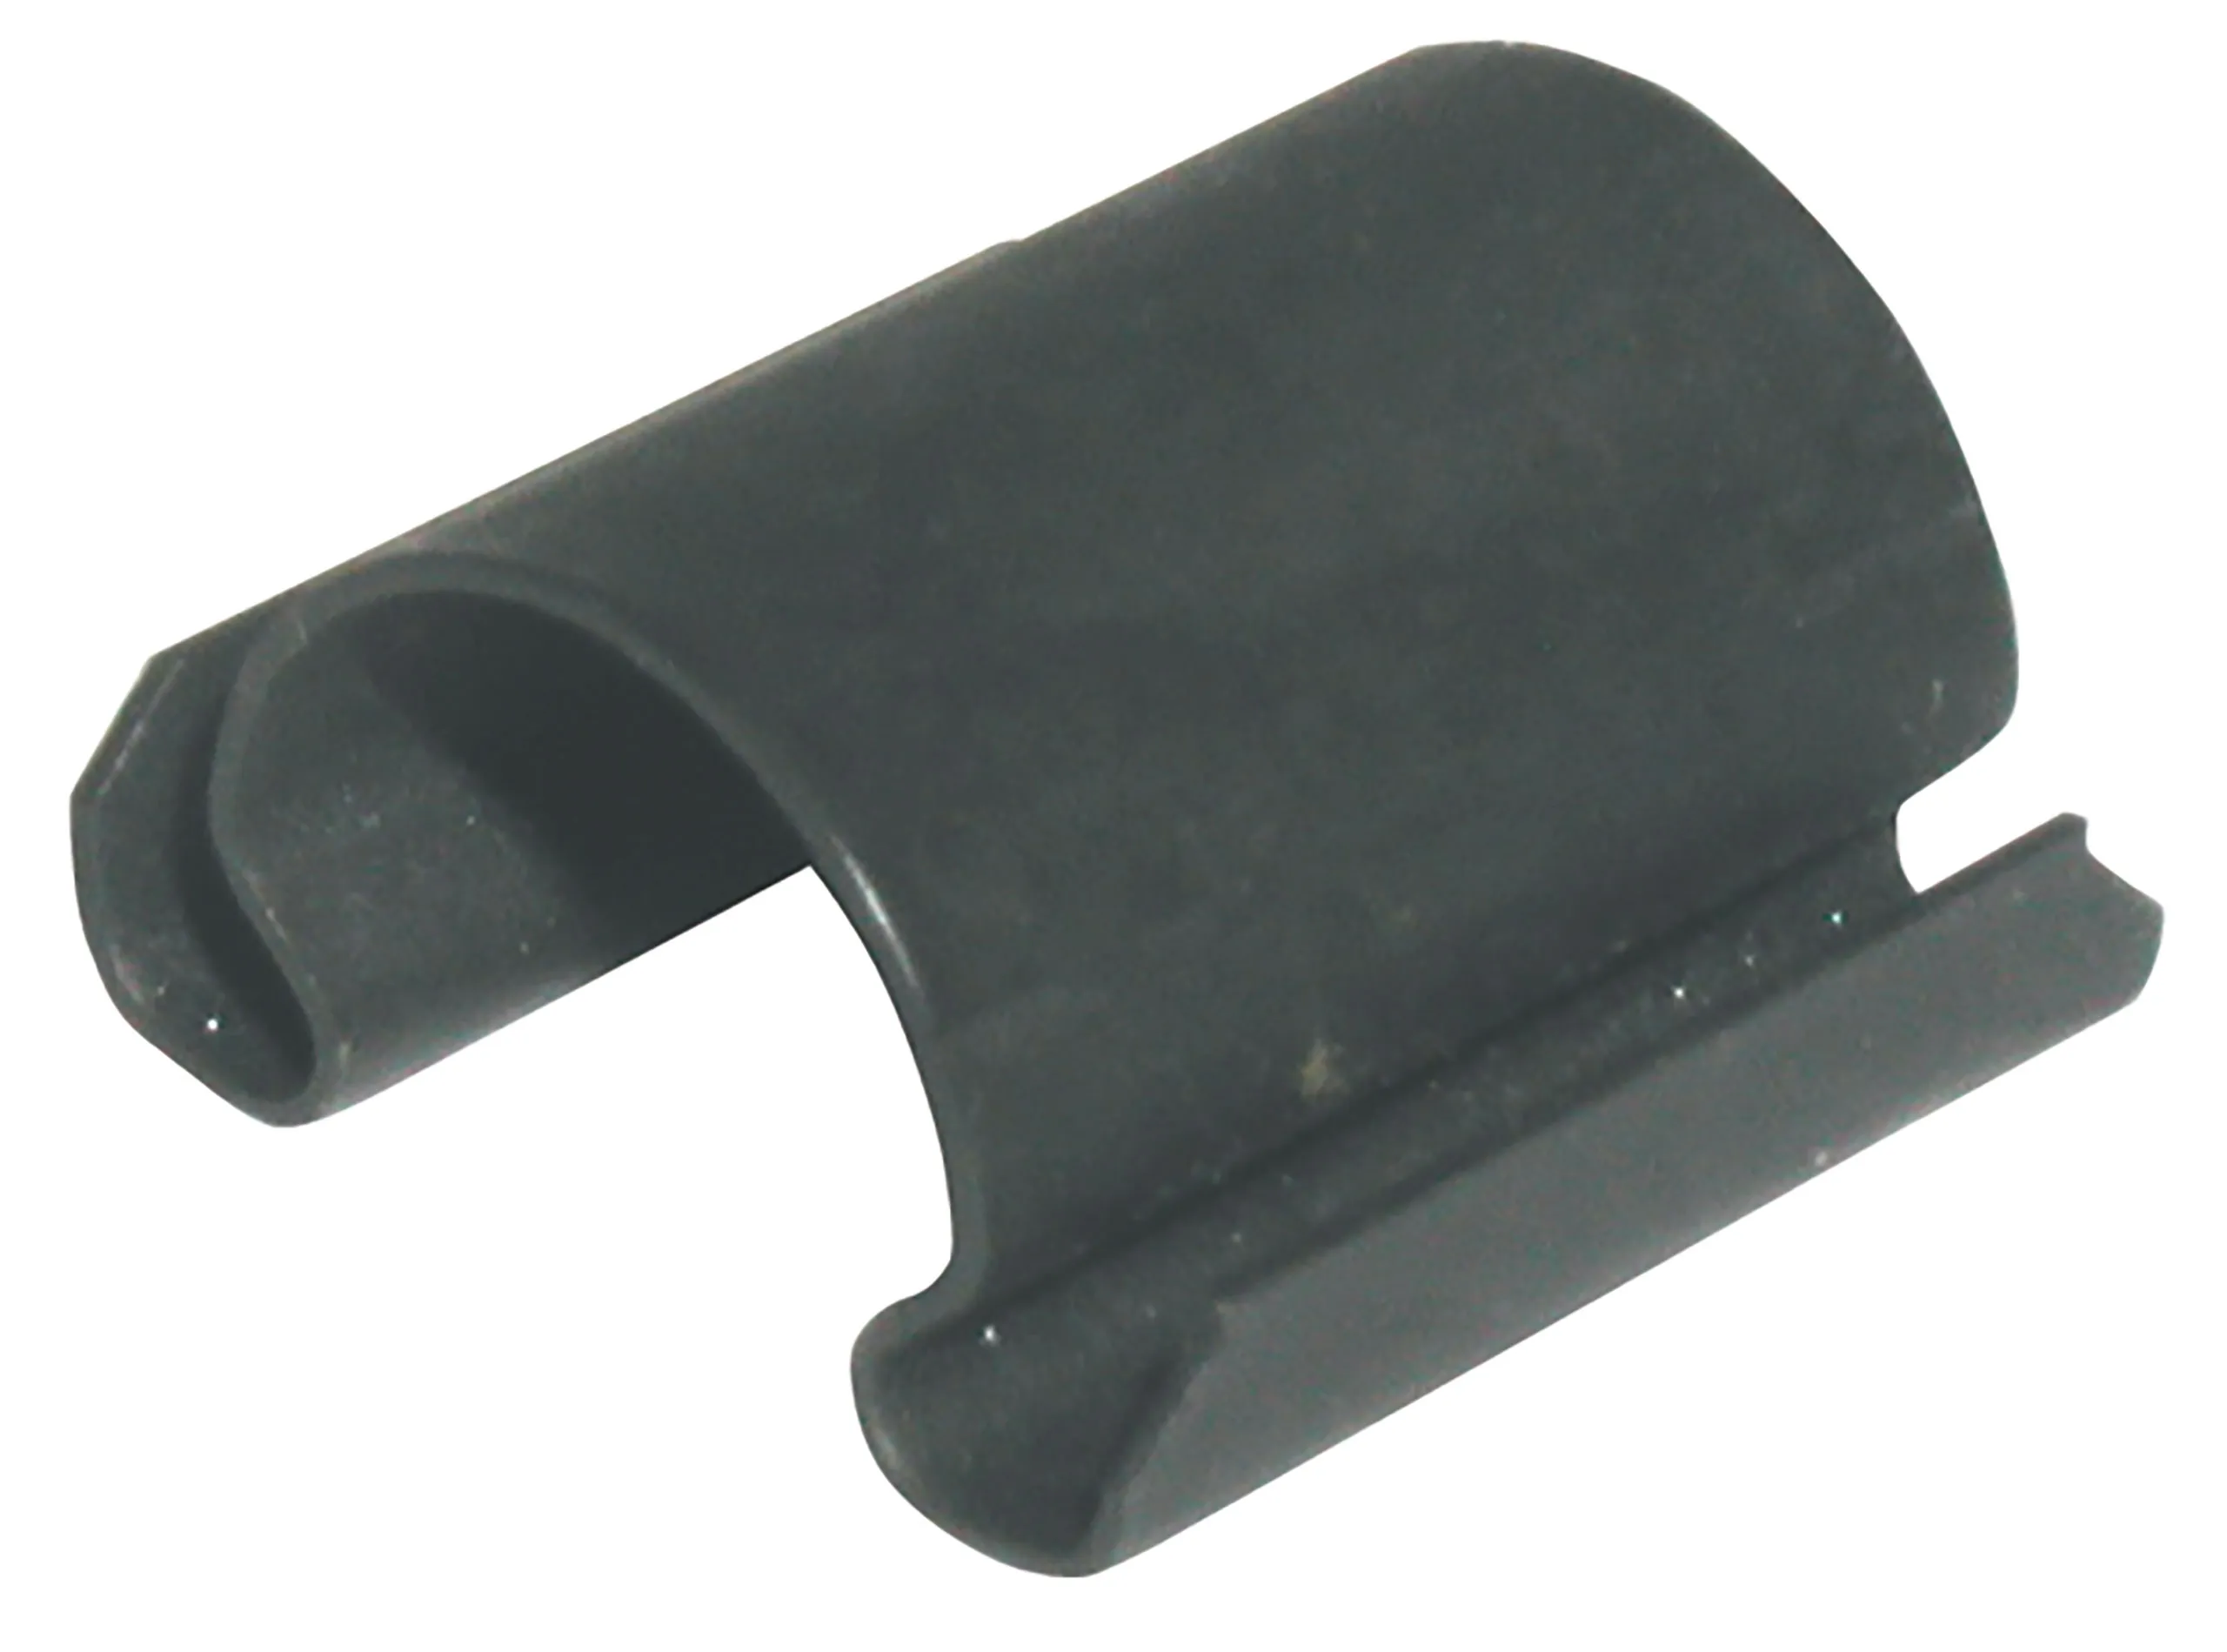 First Generation 1964 Ford Mustang Heater Box Clip - Scott Drake